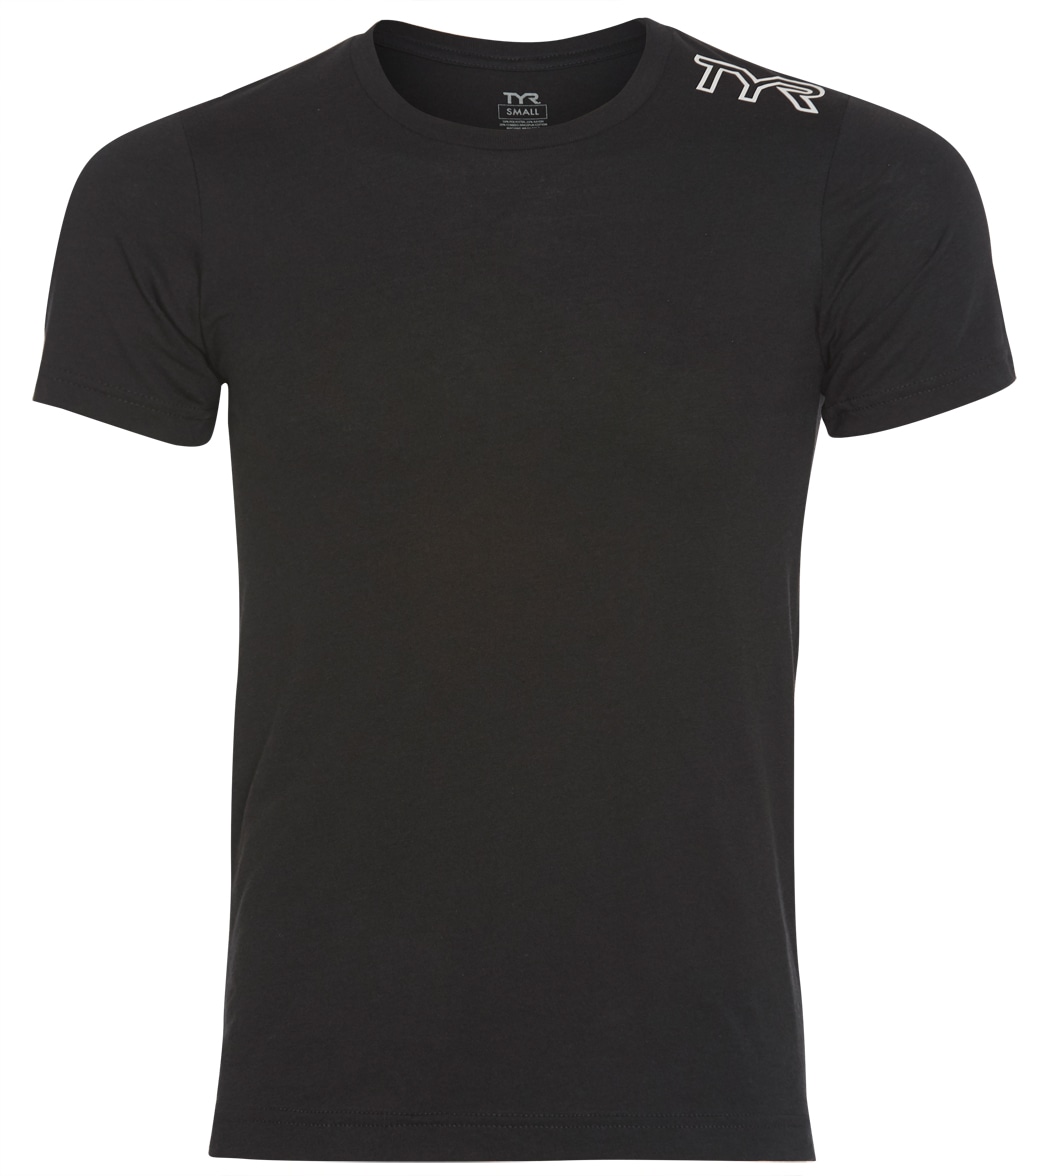 TYR Unisex Triblend Tee Shirt - Black Small Cotton/Polyester - Swimoutlet.com